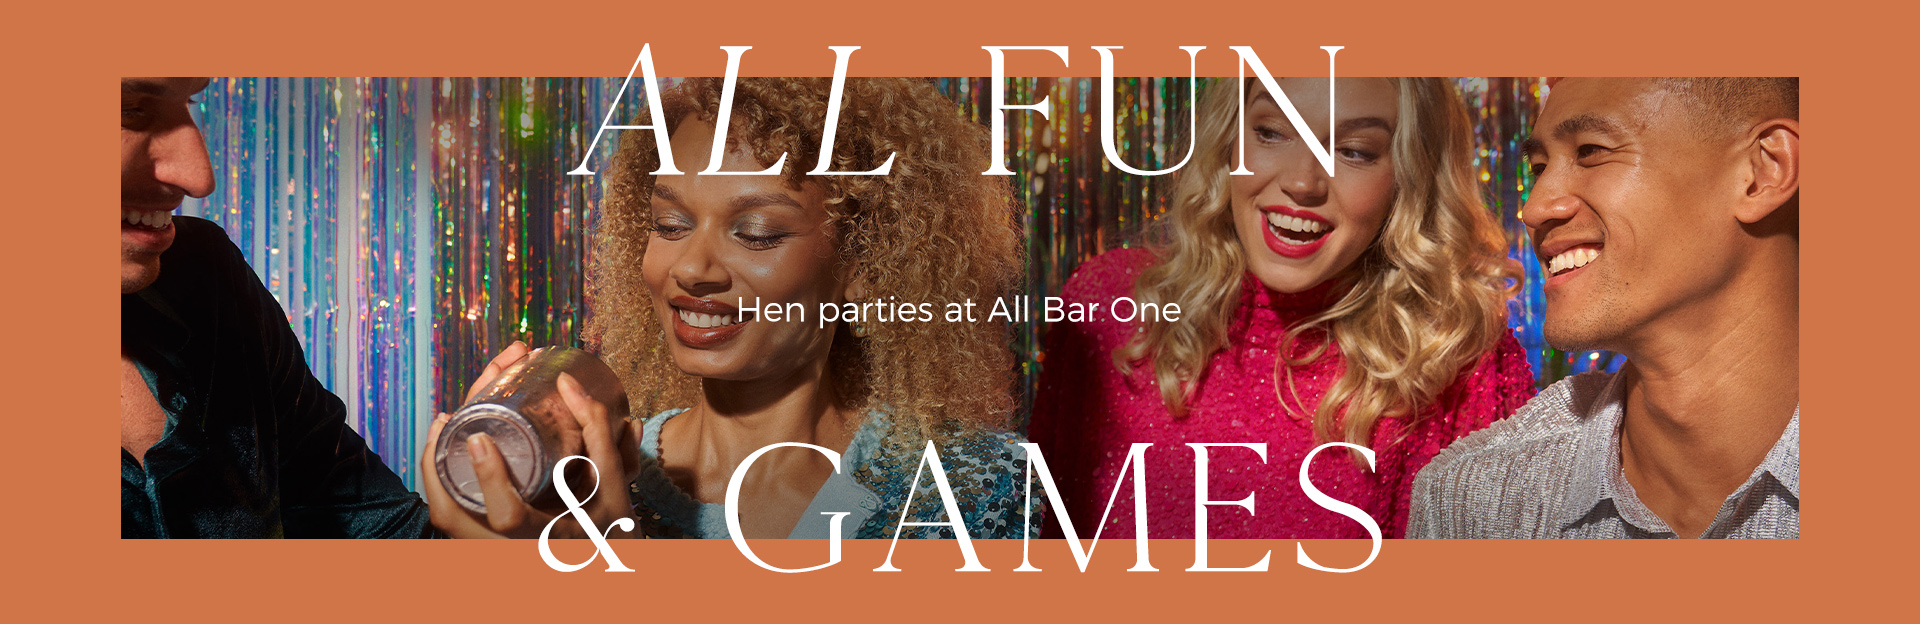 Hen parties at All Bar One New Oxford Street